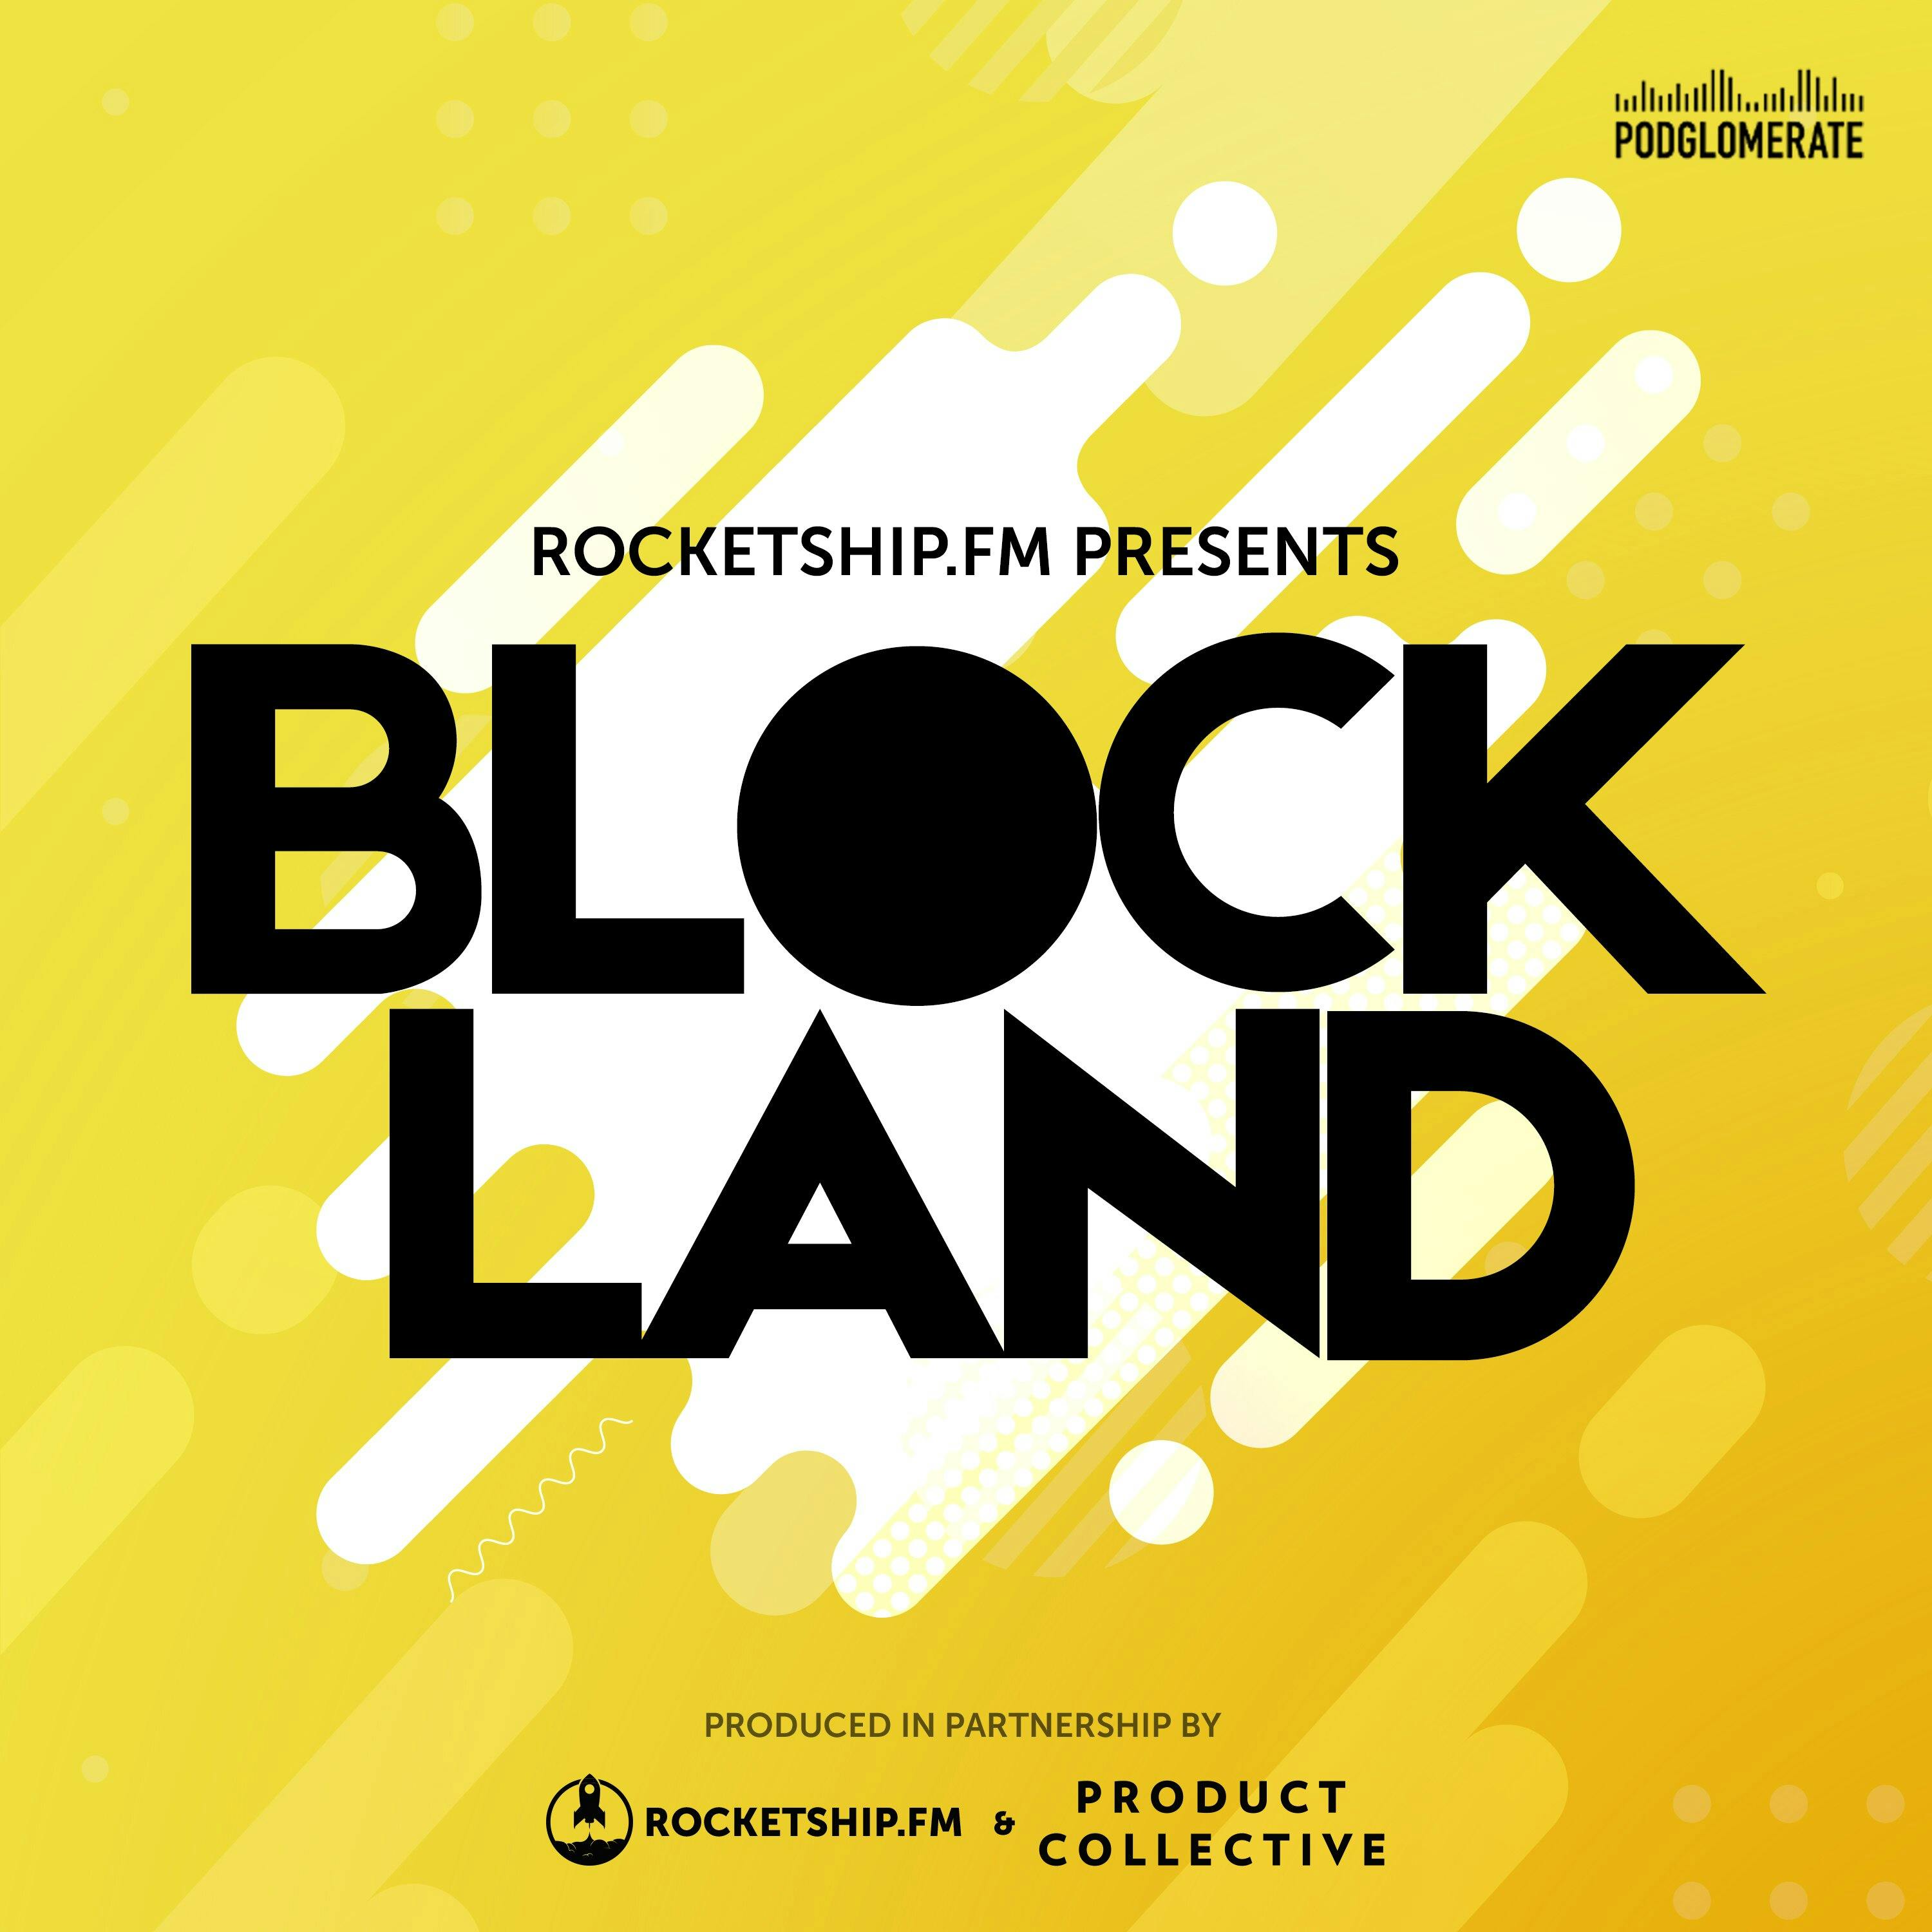 Blockland: Welcome to Blockland